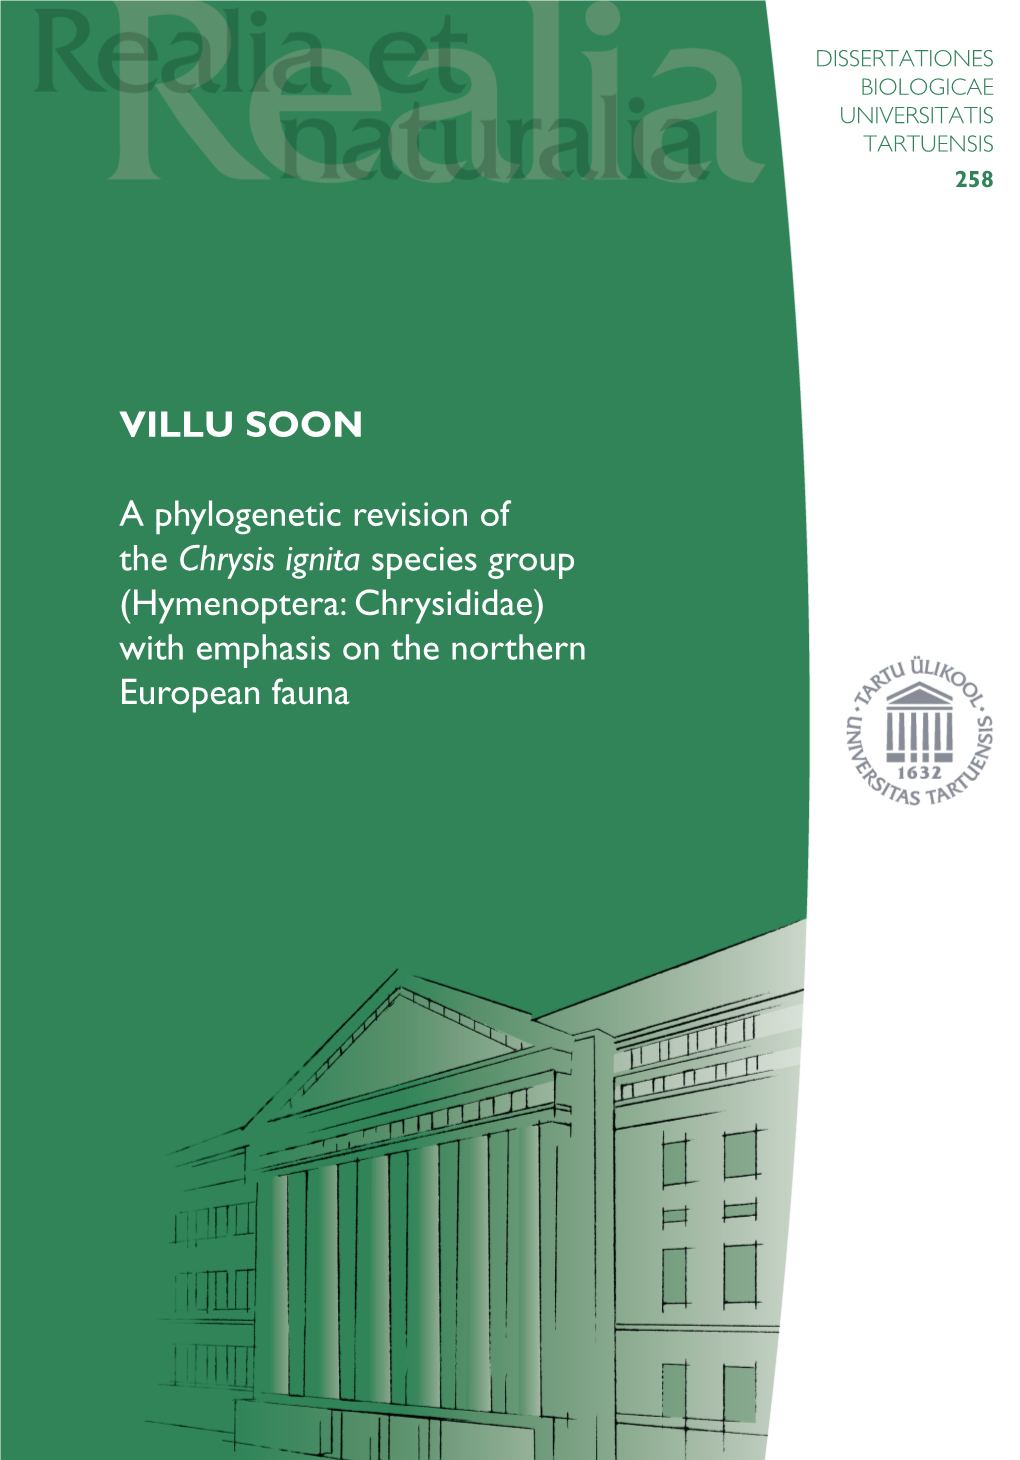 VILLU SOON a Phylogenetic Revision of the Chrysis Ignita Species Group